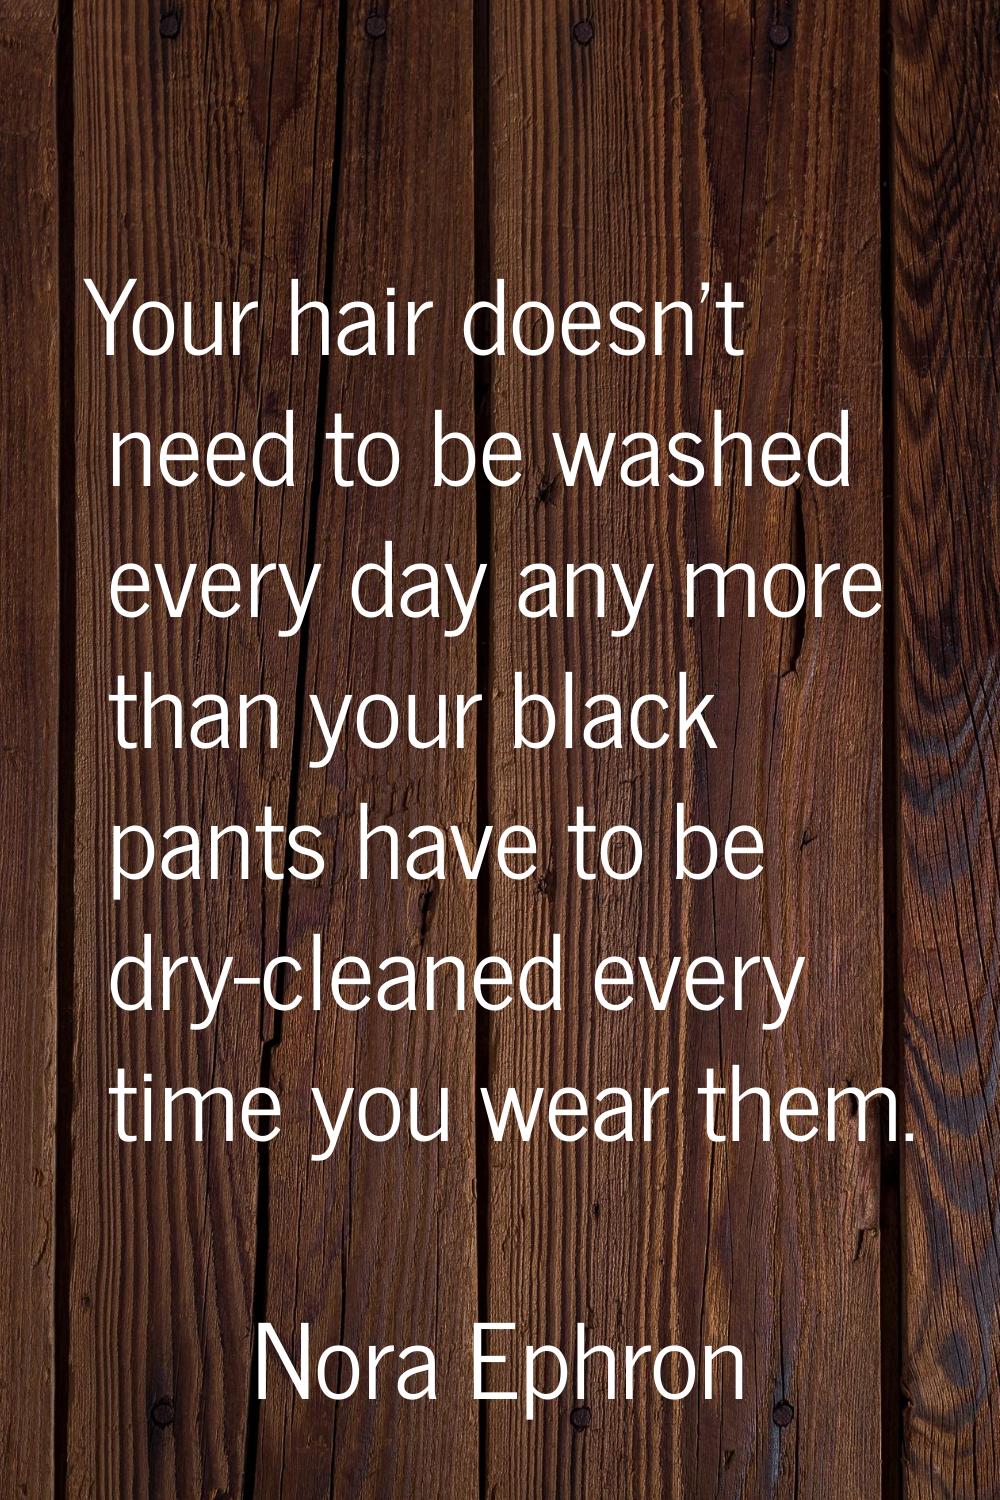 Your hair doesn't need to be washed every day any more than your black pants have to be dry-cleaned